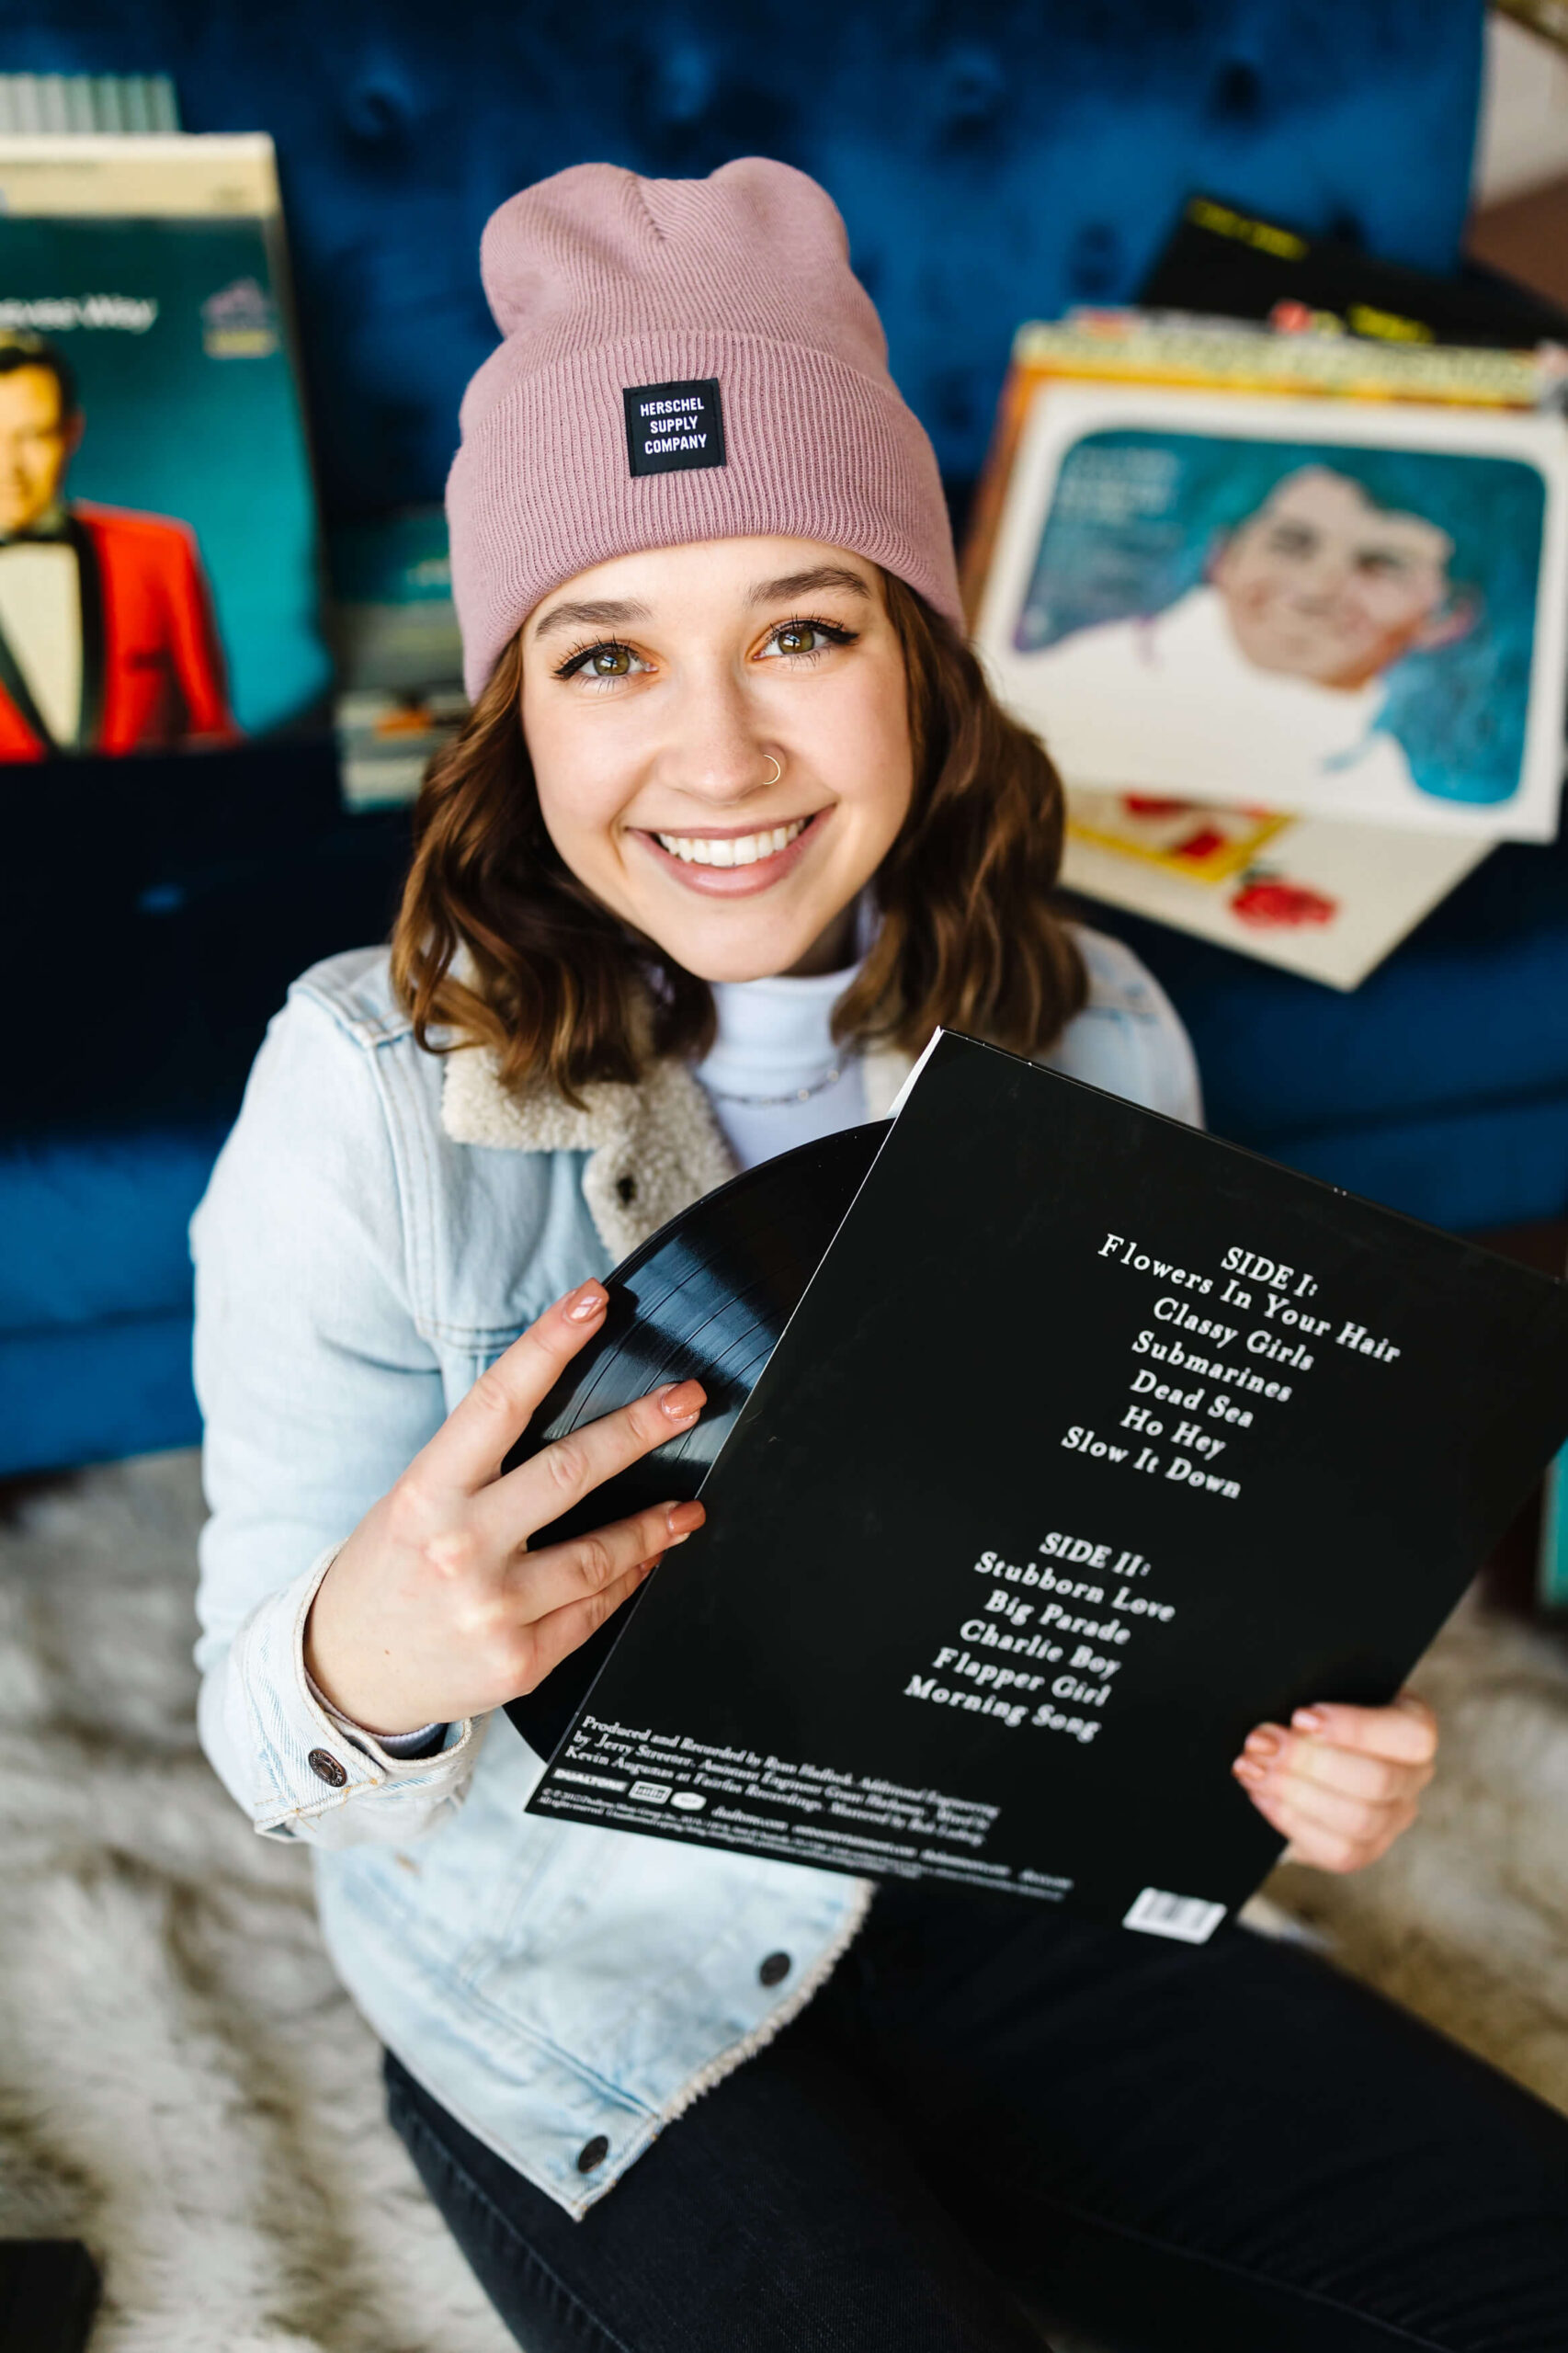 girl wearing pink beanie, blue jean jacket sitting in front of blue velvet couch taking a vinyl record album out of its cover during senior studio photoshoot